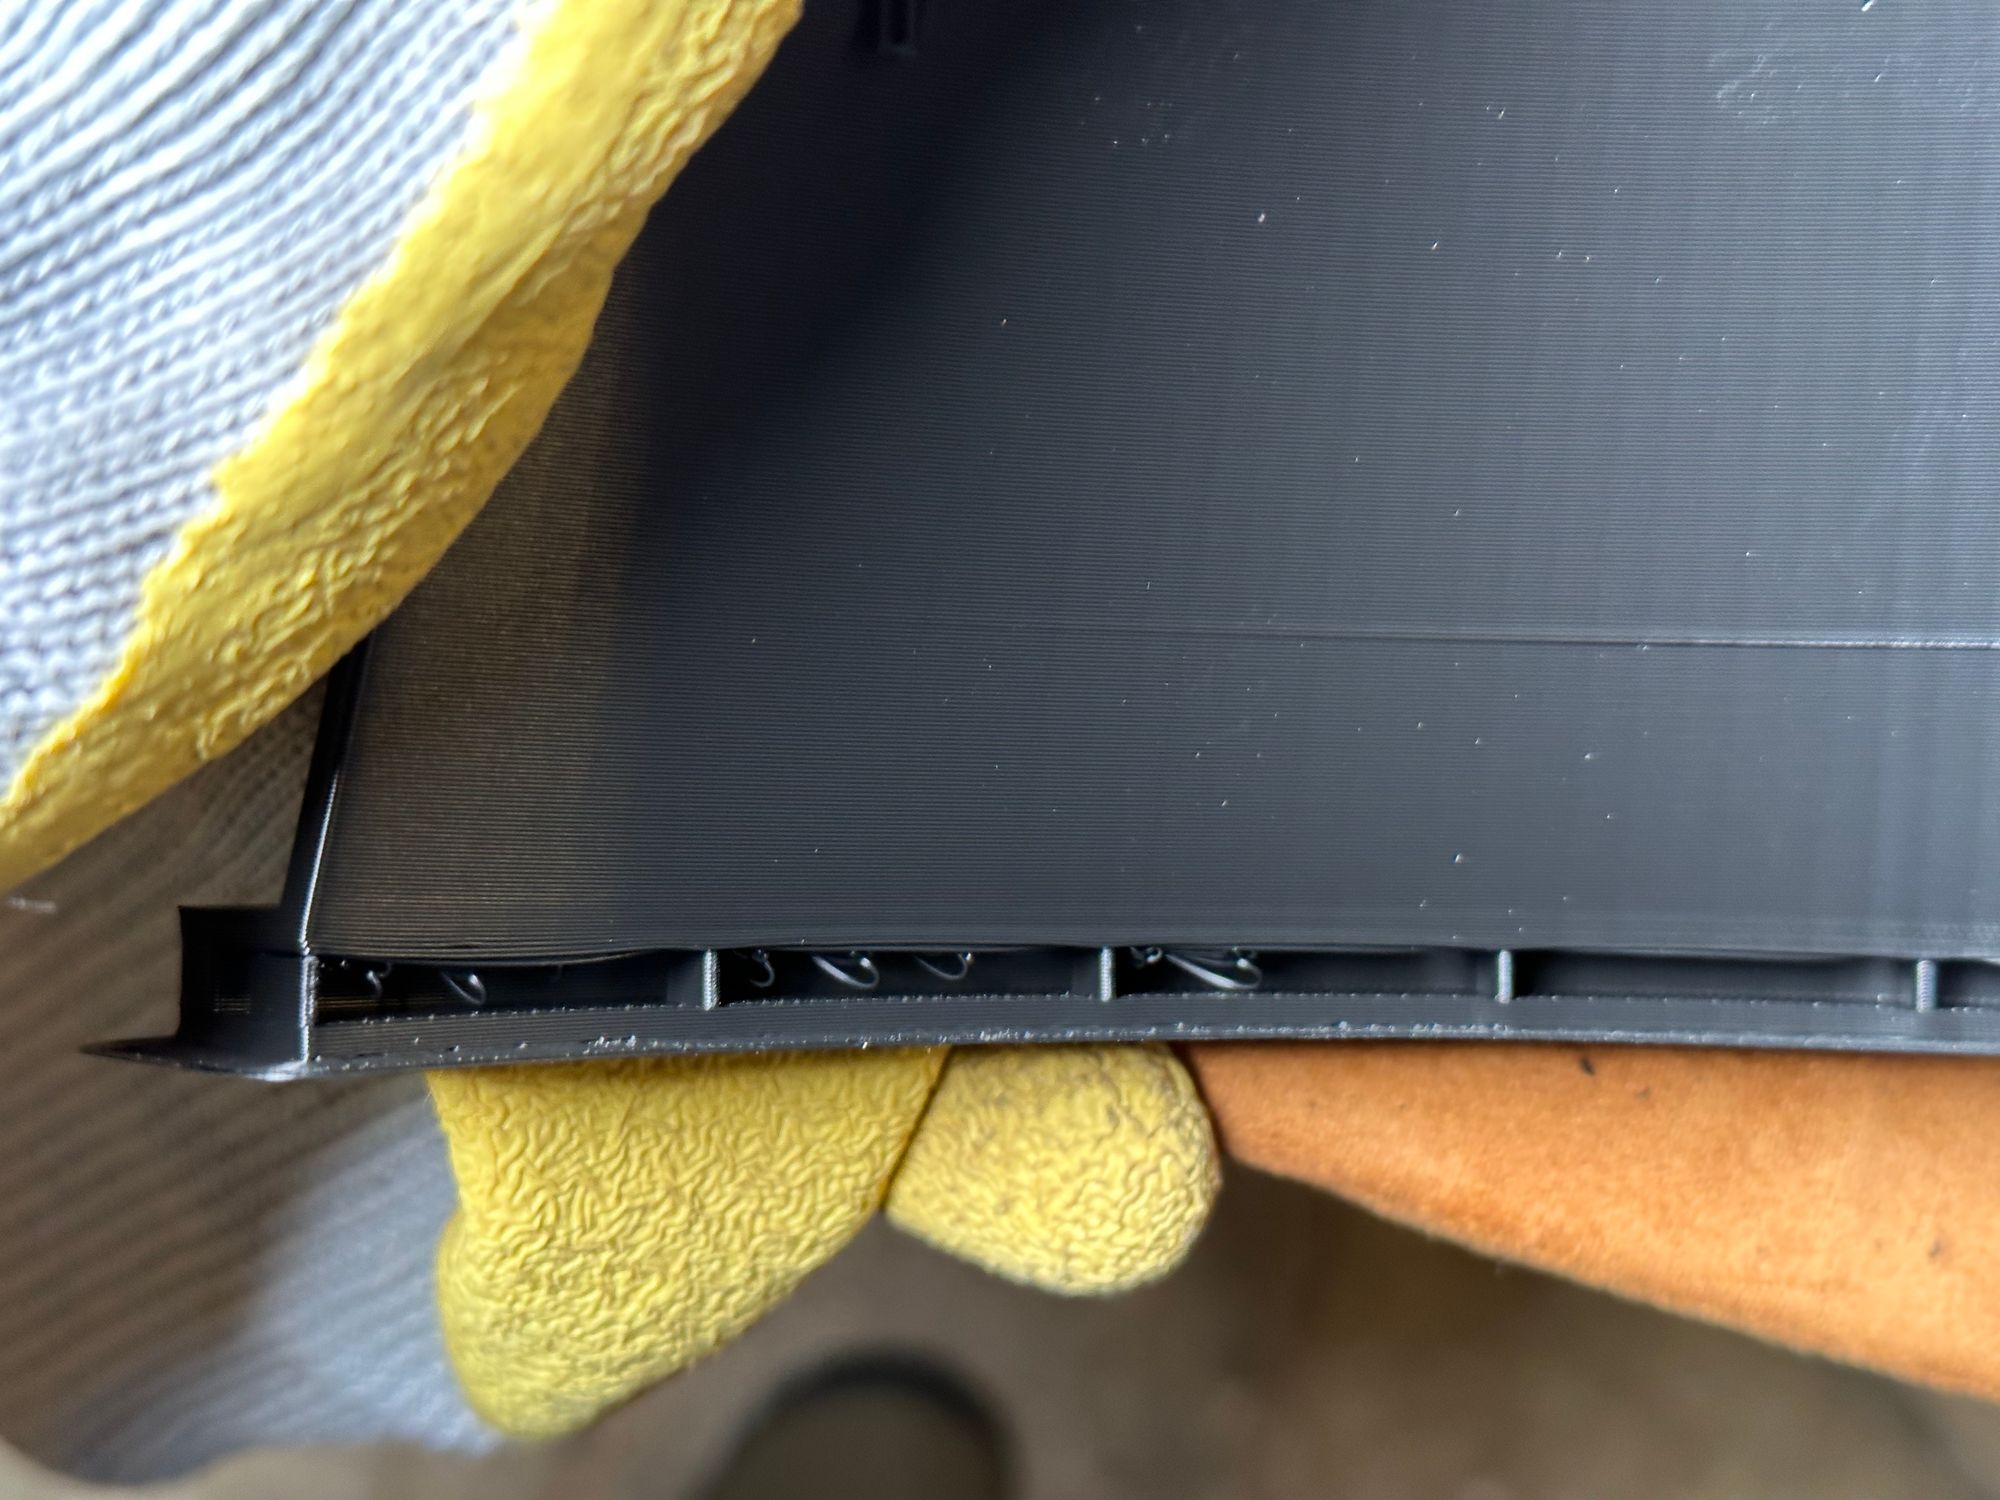 A closeup of the slot for receiving the duct ring, showing some strands of filament that have drooped or looped around without supports to hold them.